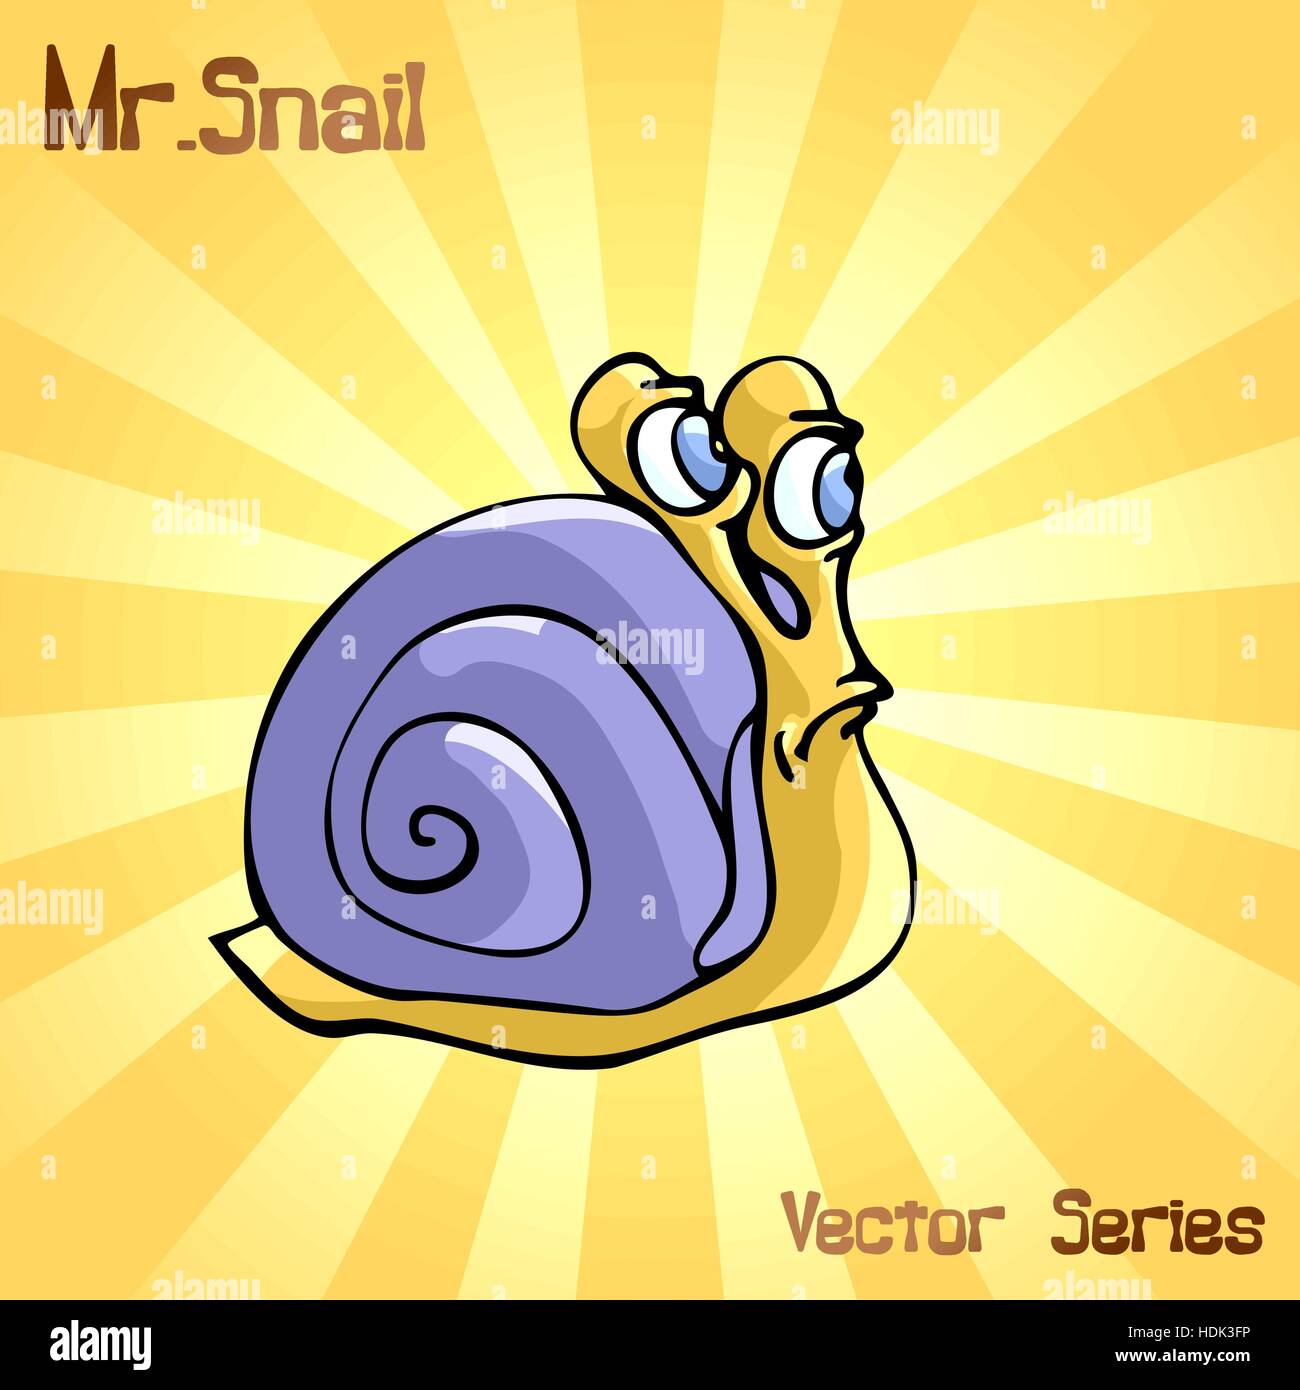 Mr. Snail with discontent. vector illustration Stock Vector